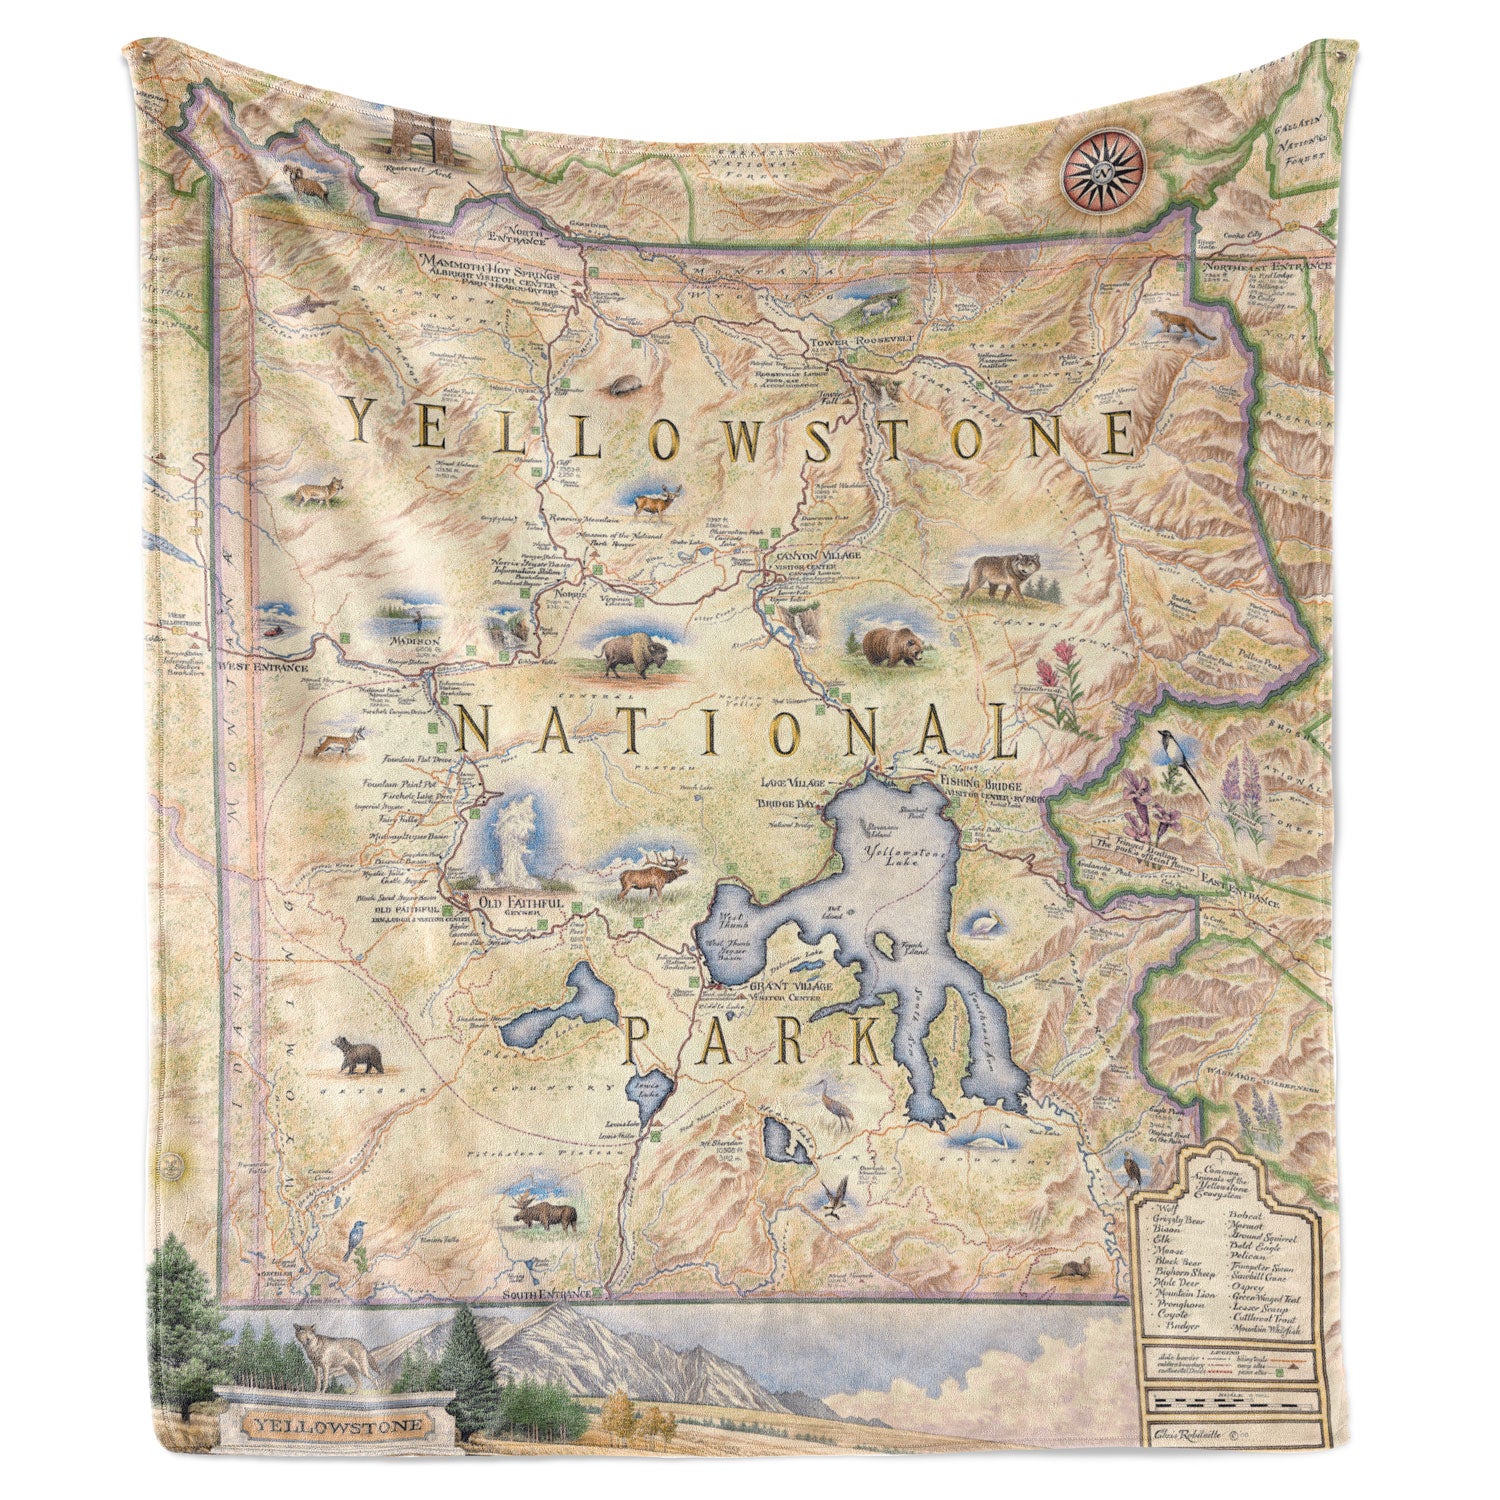 Hanging fleece blanket with artistic map of Yellowstone National Park.